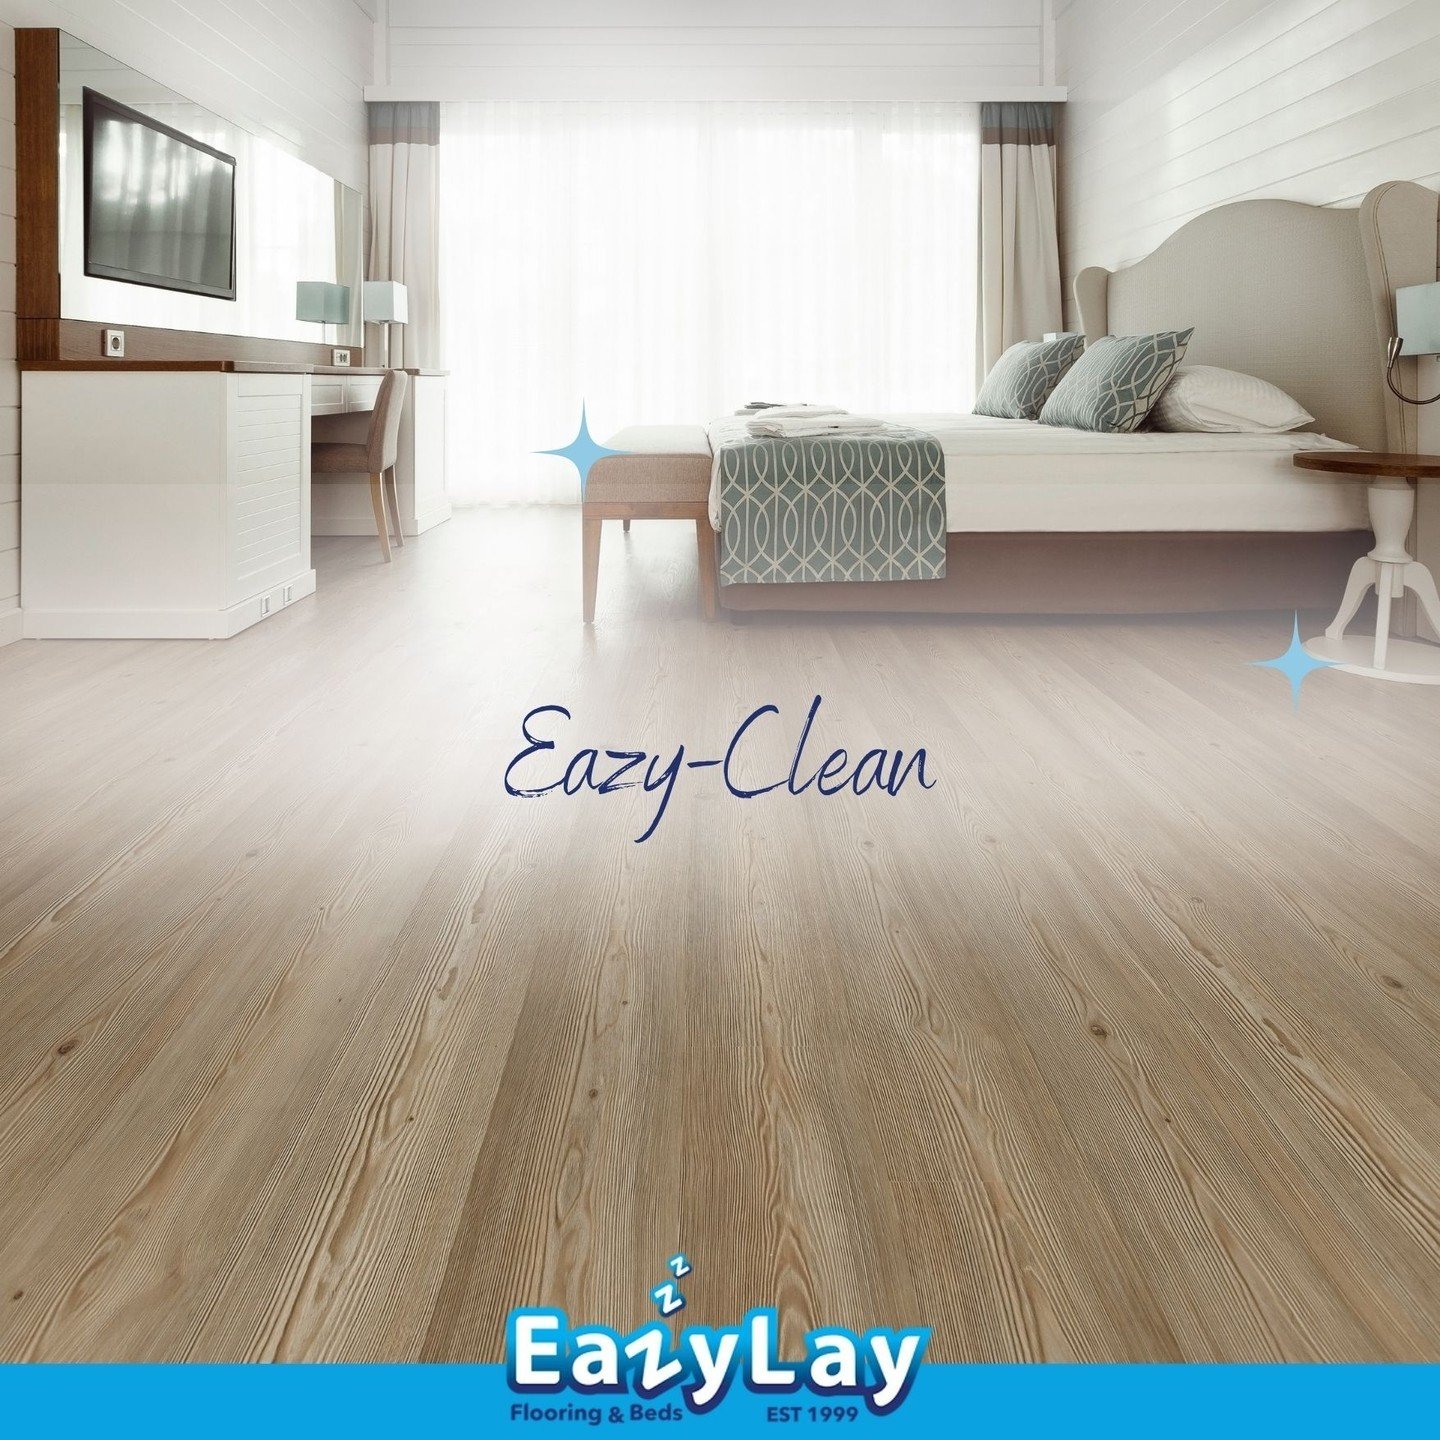 Say hello to hassle-free cleaning with our Eazy-Clean Luxury Vinyl Tile! ✨ Effortlessly maintain a pristine look while enjoying the elegance of luxury vinyl. Easy on the eyes, even easier to clean! #EazyClean #LuxuryVinylTile #EffortlessMaintenance #